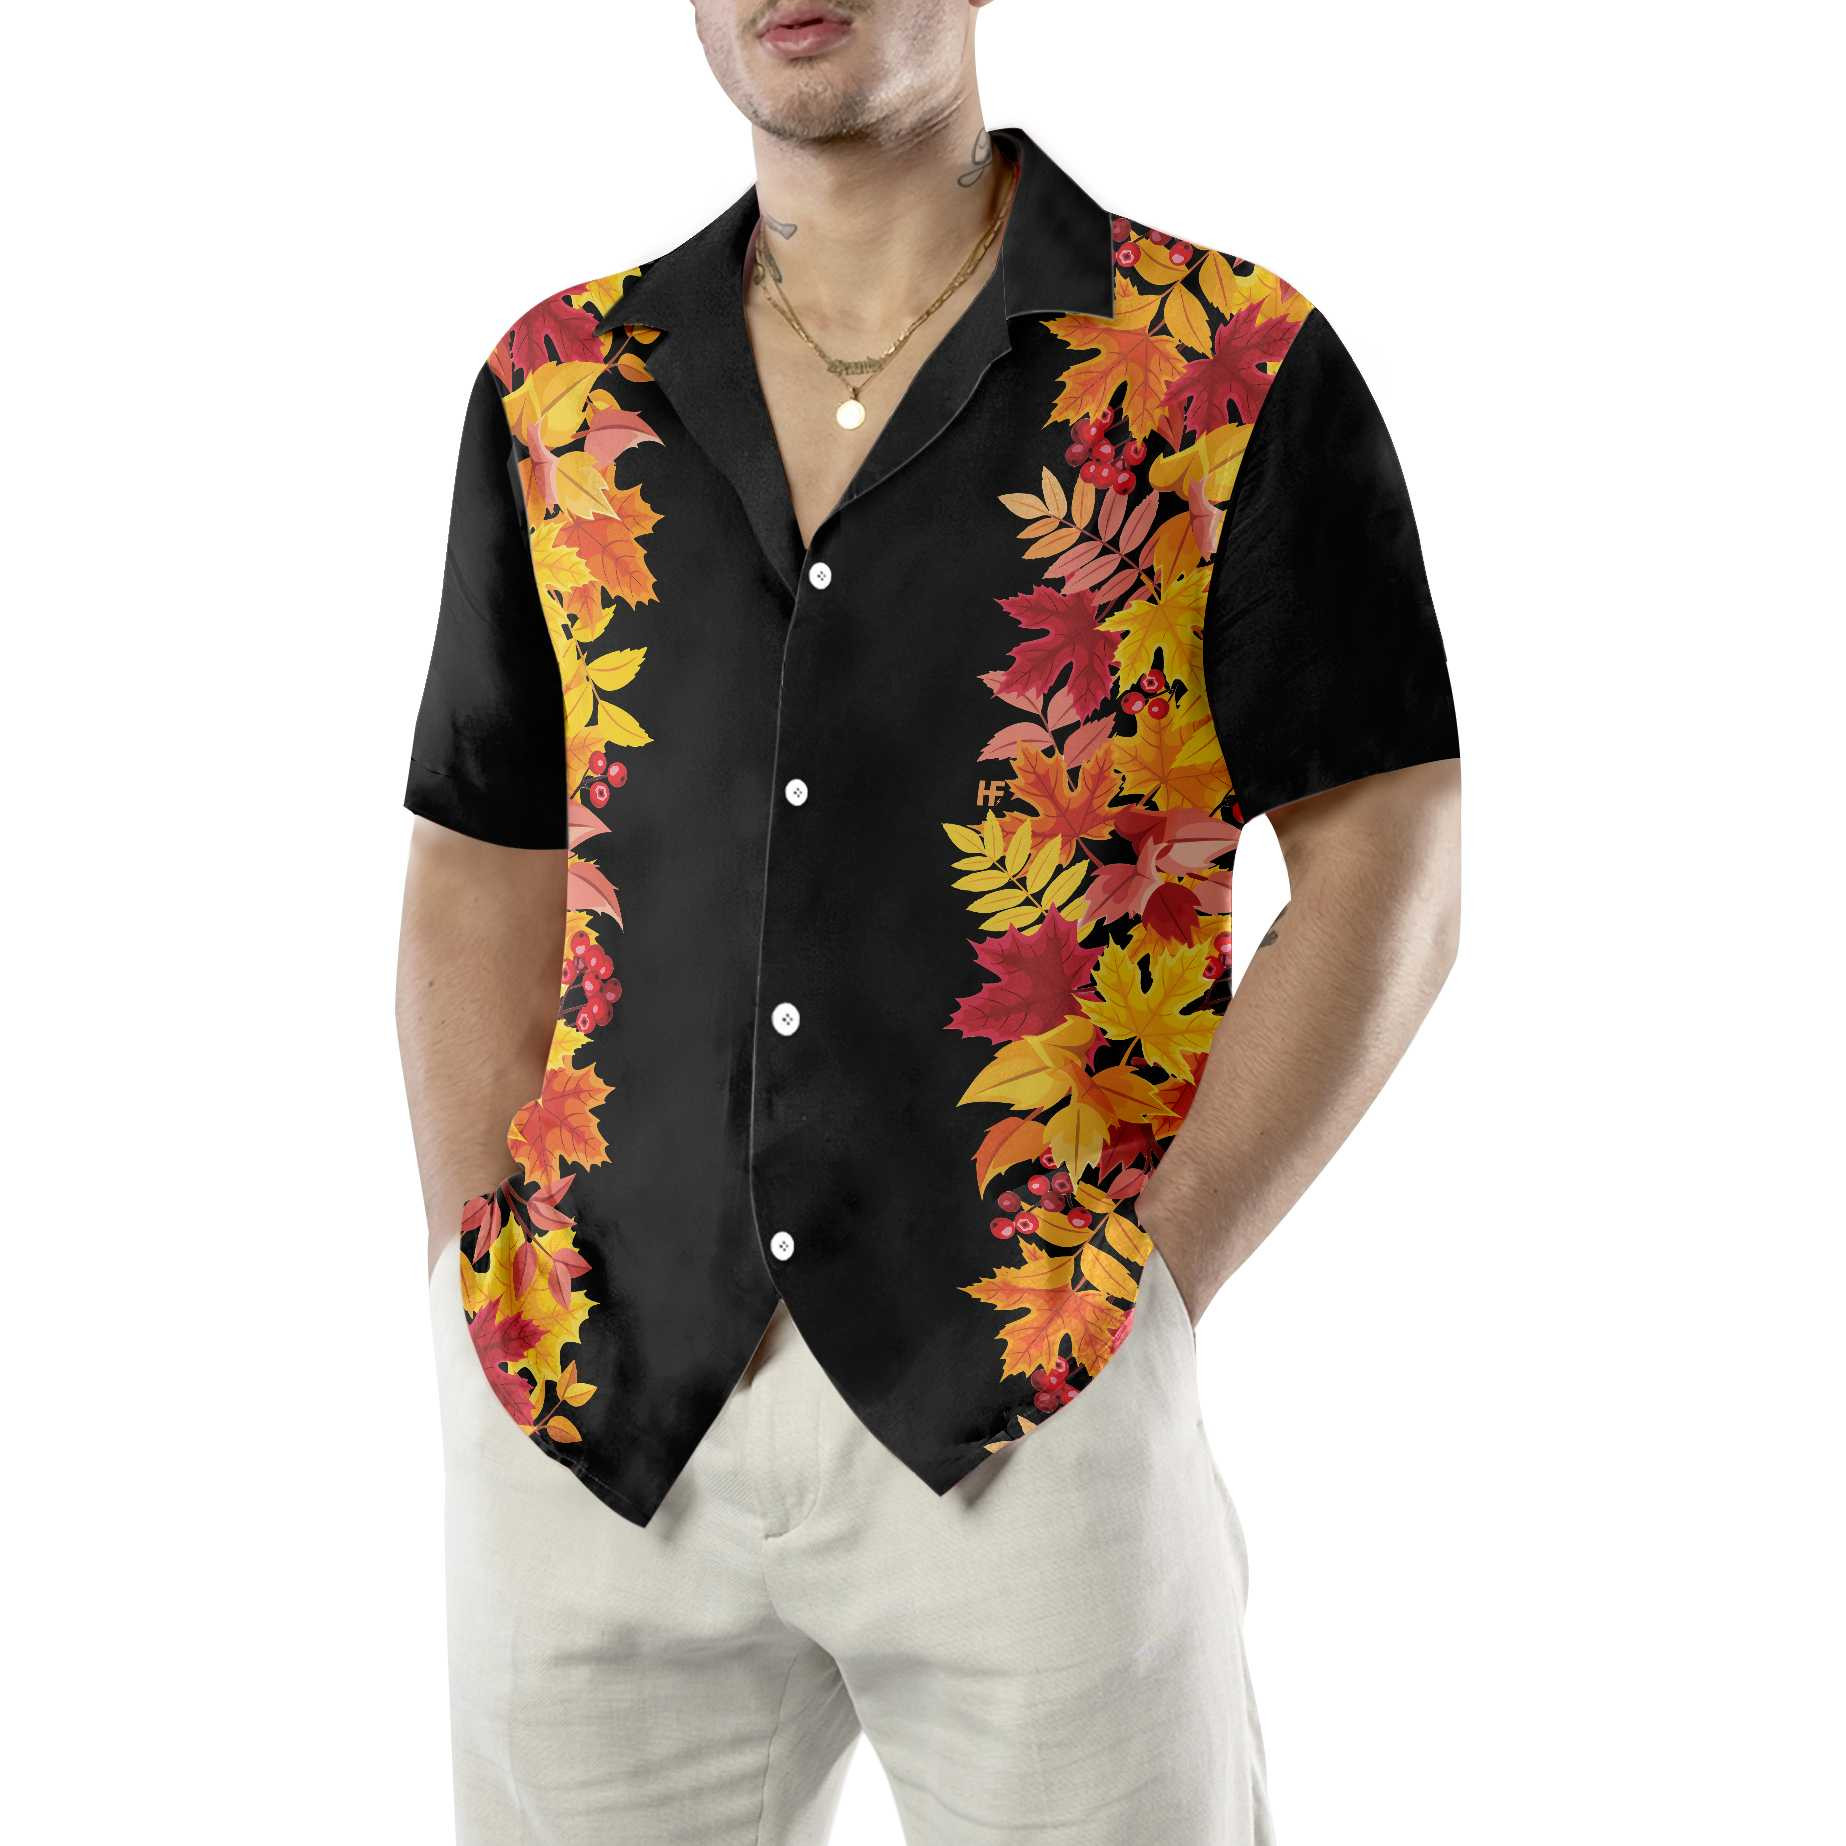 Colorful Autumn Thanksgiving Theme Hawaiian Shirt, Best Gift For Thanksgiving Day